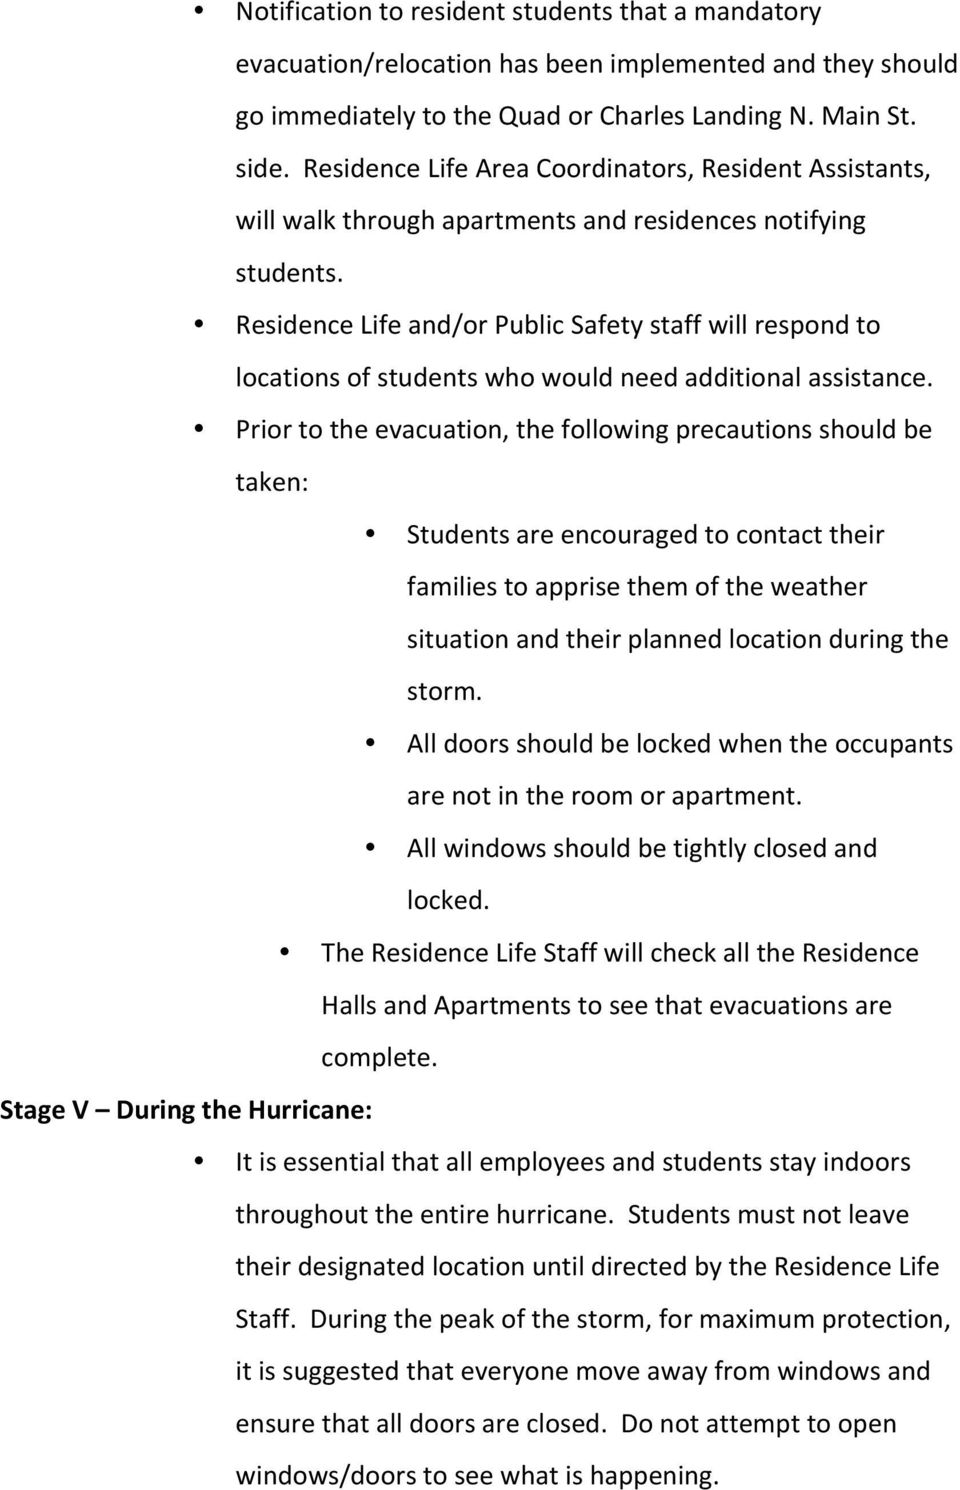 Residence Life and/or Public Safety staff will respond to locations of students who would need additional assistance.